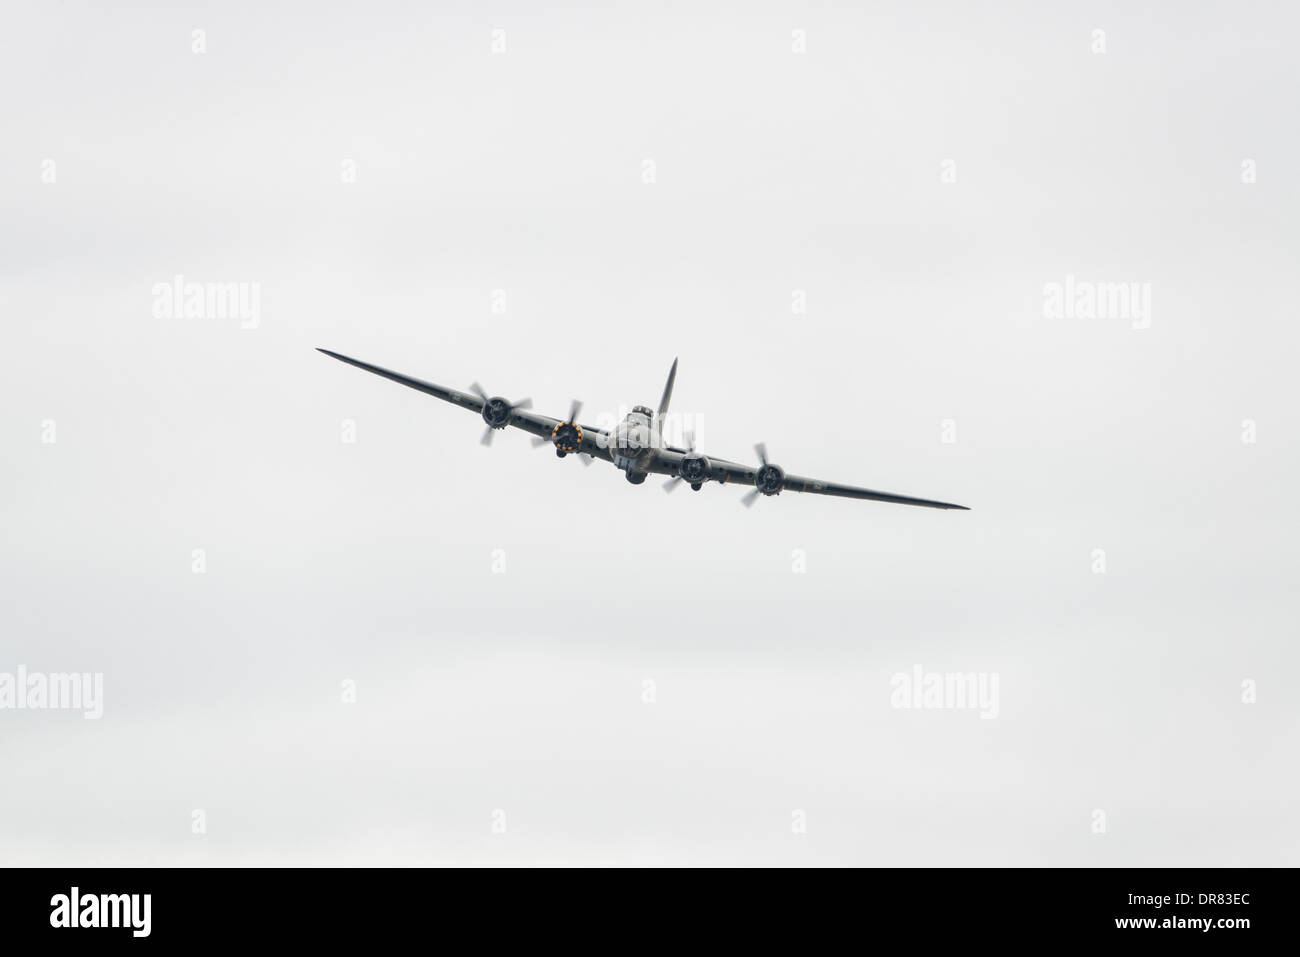 Iconic American World War Two Heavy Bomber Aircraft the B-17 named Sally B displays at 2013 Royal International Air Tattoo. Stock Photo